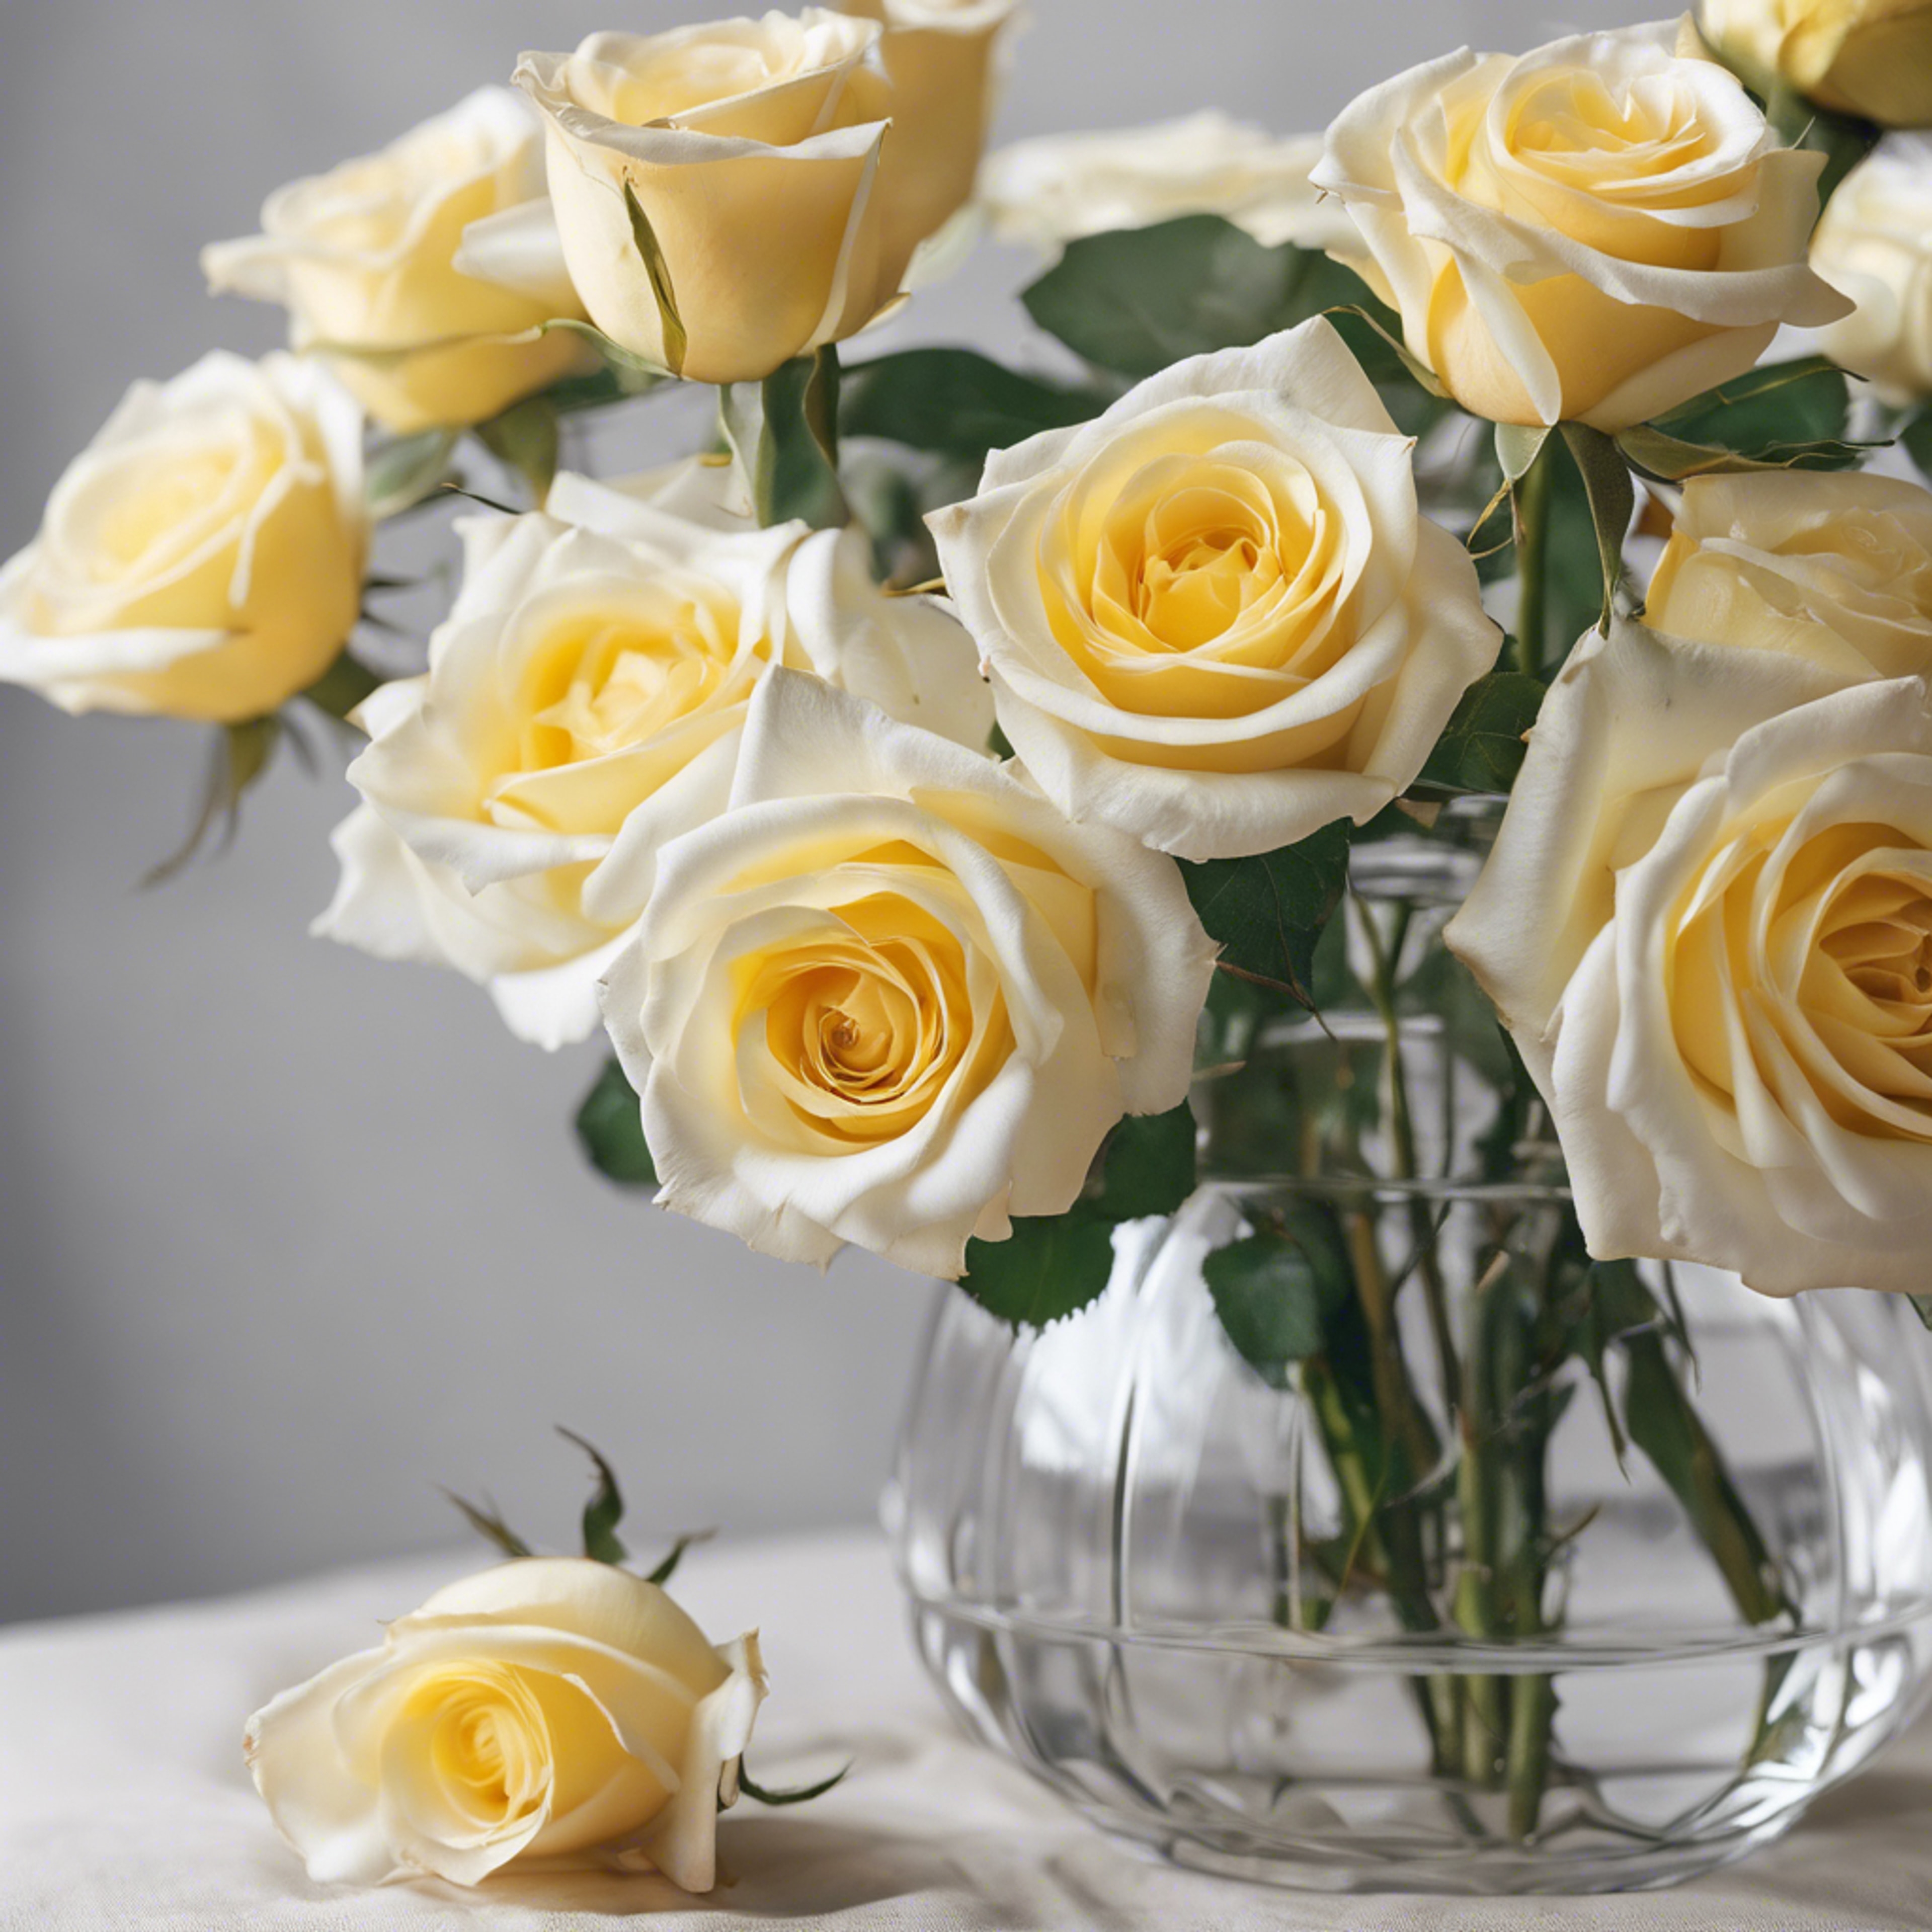 A beautiful array of luminescent white and yellow roses in a crystal clear vase. Tapeta[29c0e485a0b1412795b9]